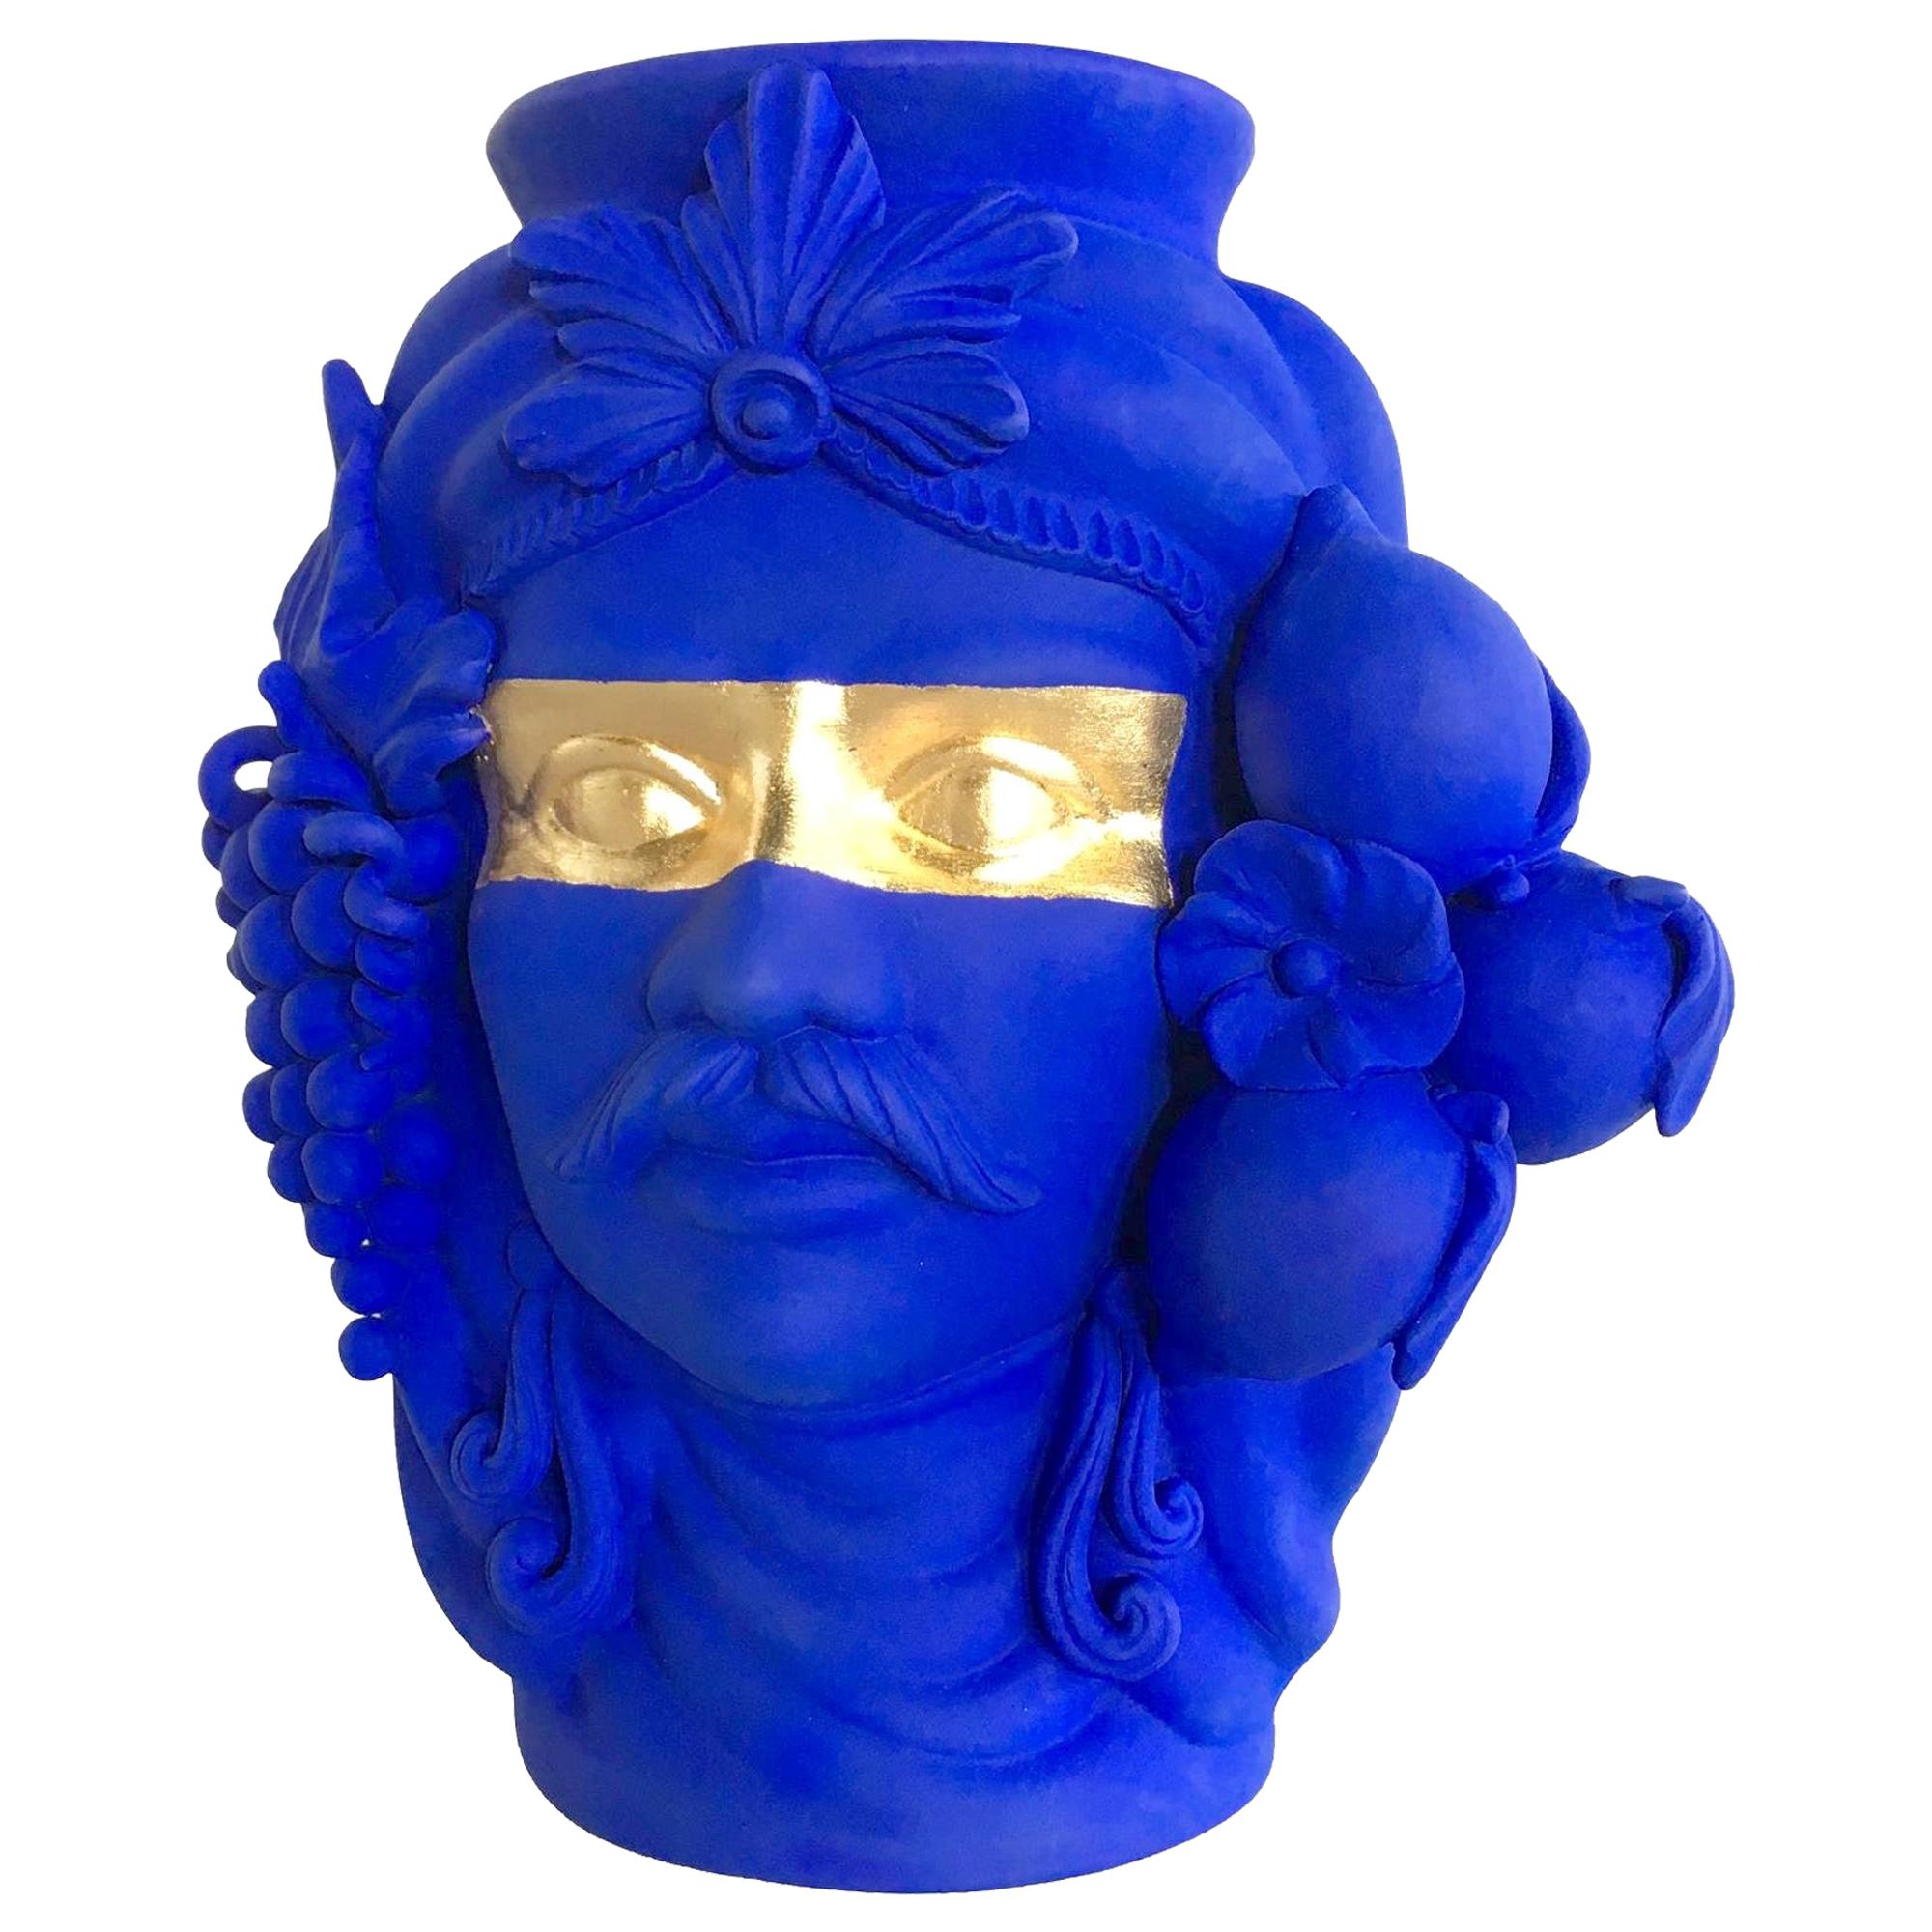 In stock in Los Angeles, Blue & Gold Vase, by Stefania Boemi, Made in Italy